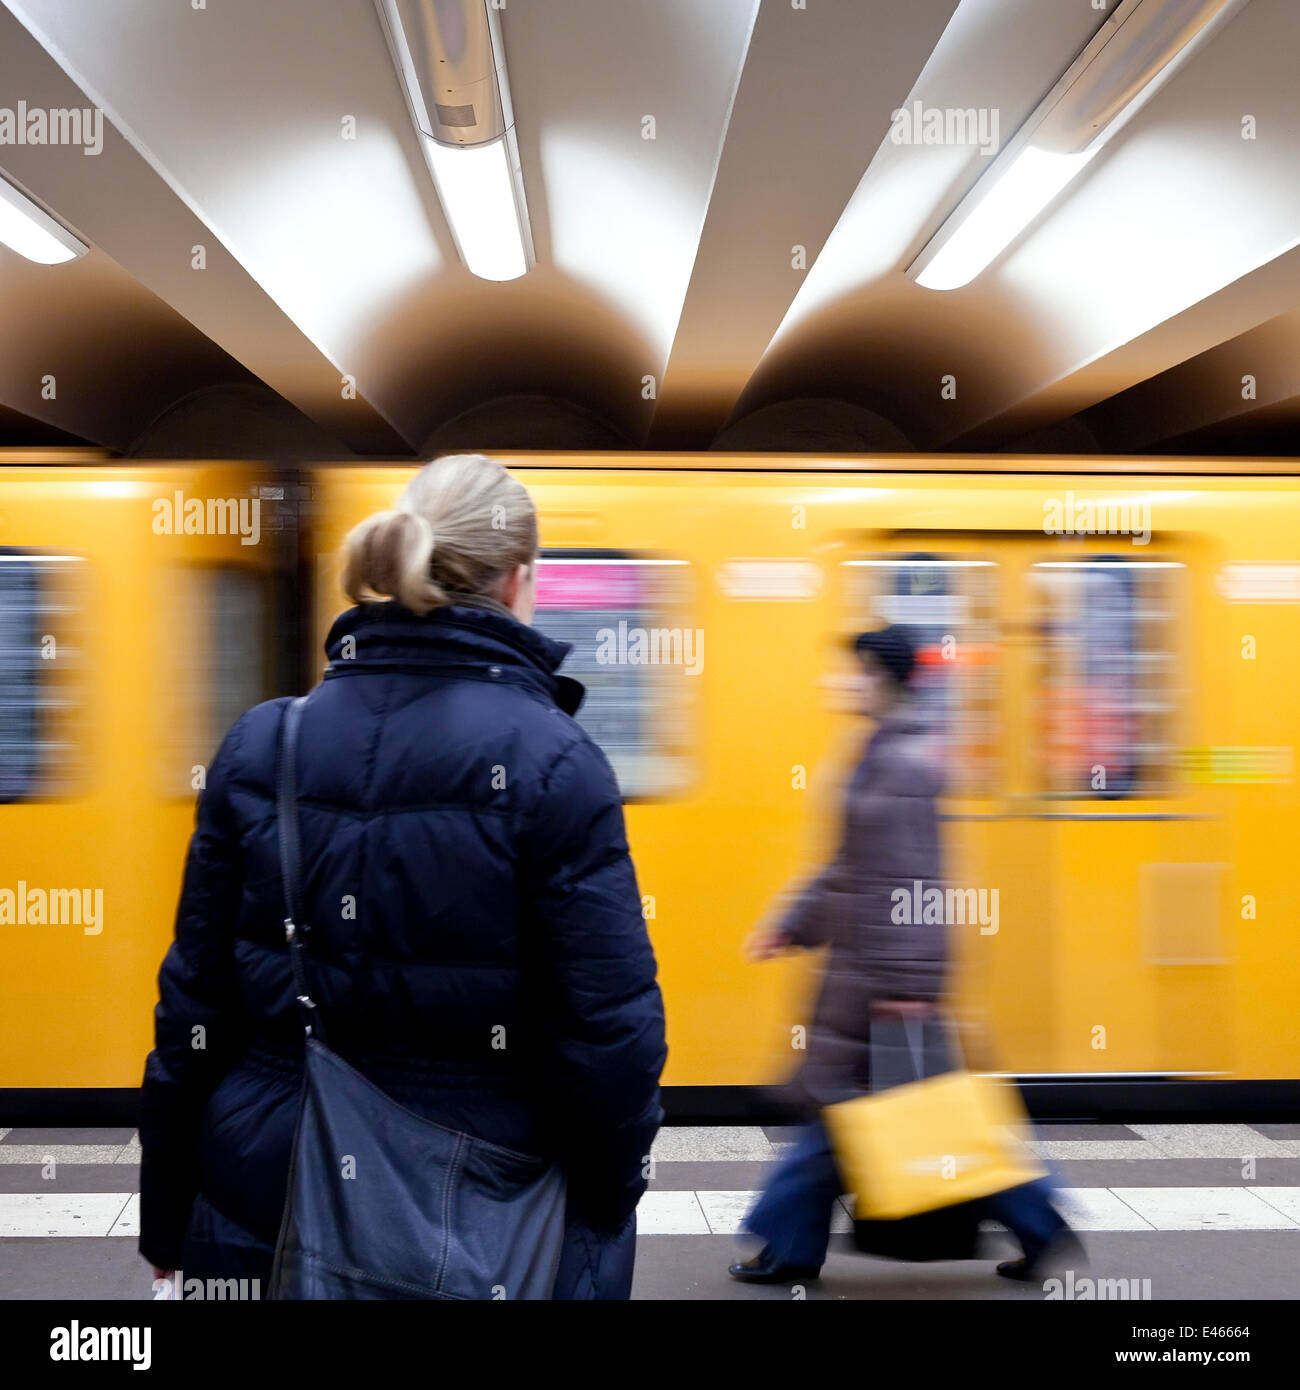 Moving train pulling into the station with people waiting, modern subway station, Berlin, Germany, 2009 Stock Photo